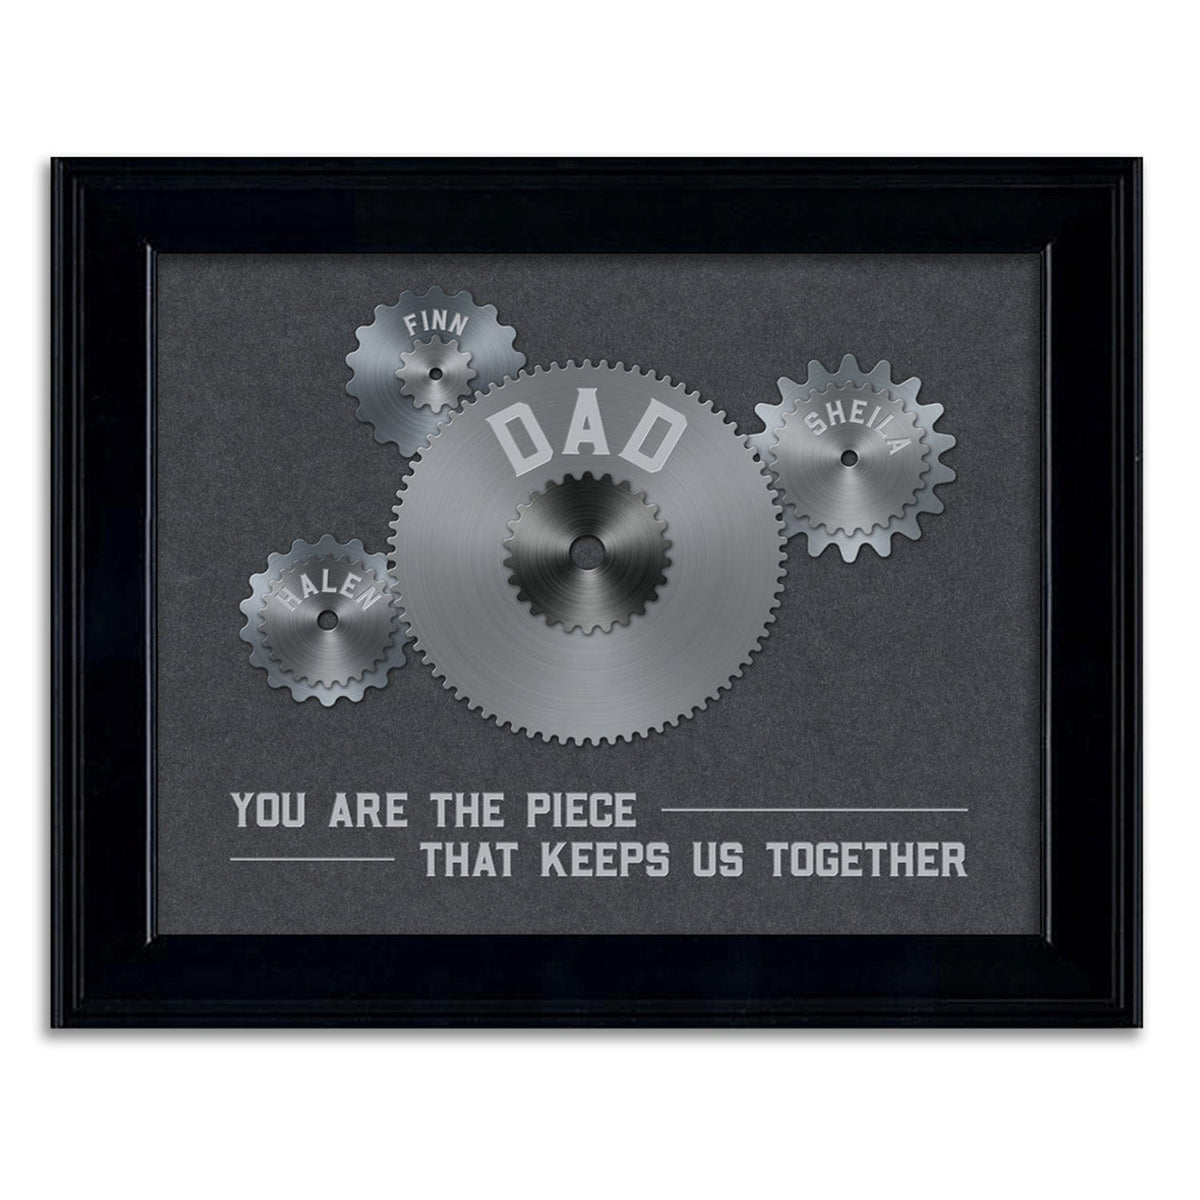 Personalized Dad Gift Framed under glass